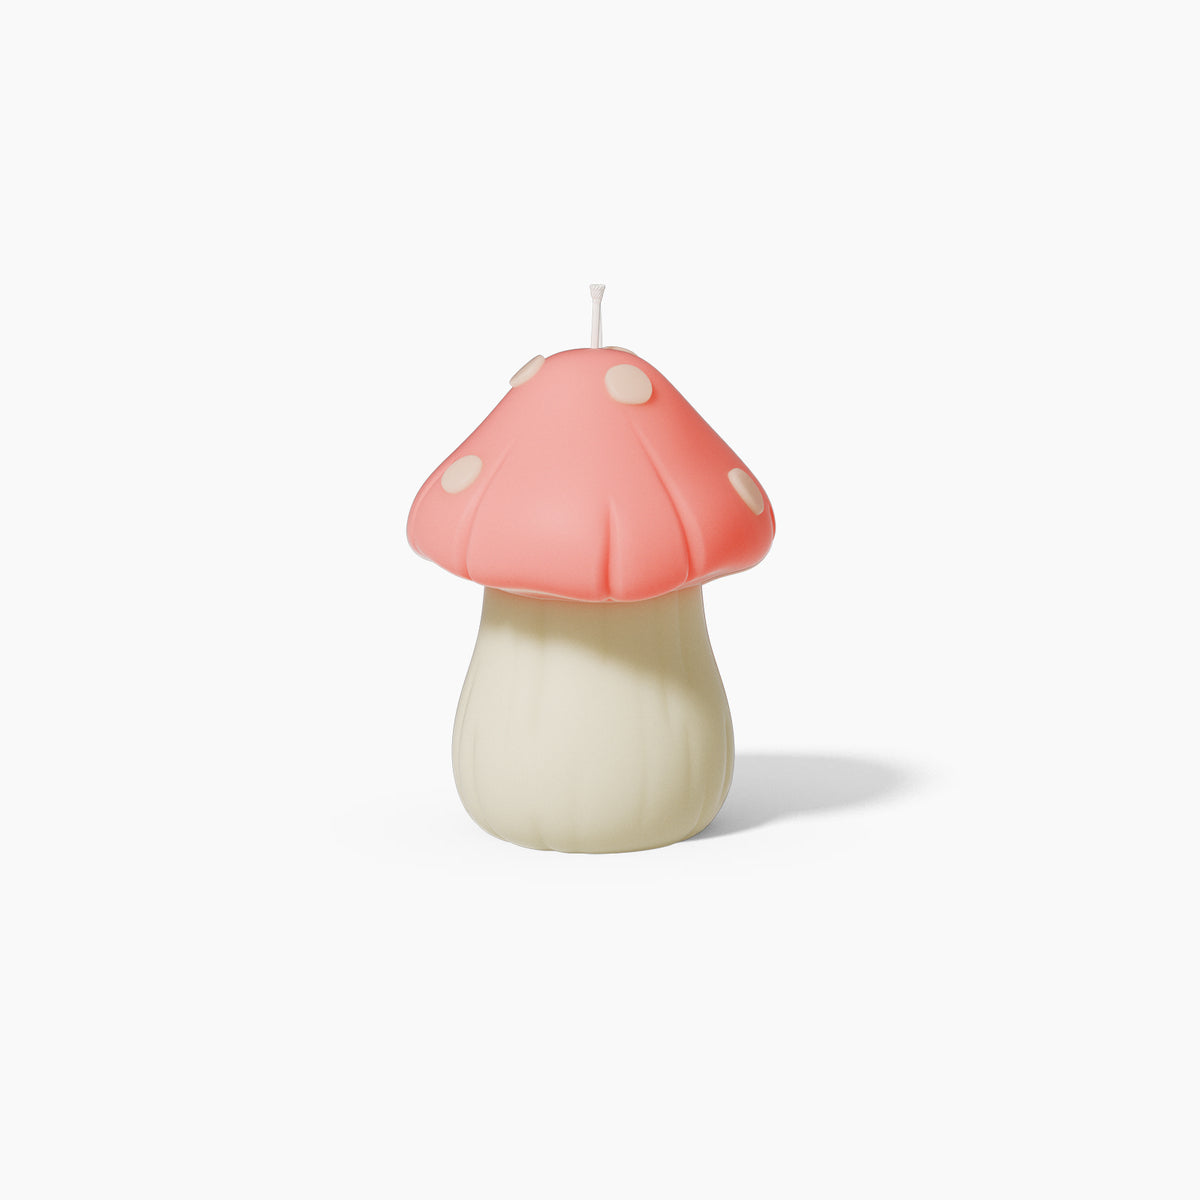 Silicone Mold - Mushroom - for Making Soaps, Candles and Figurines